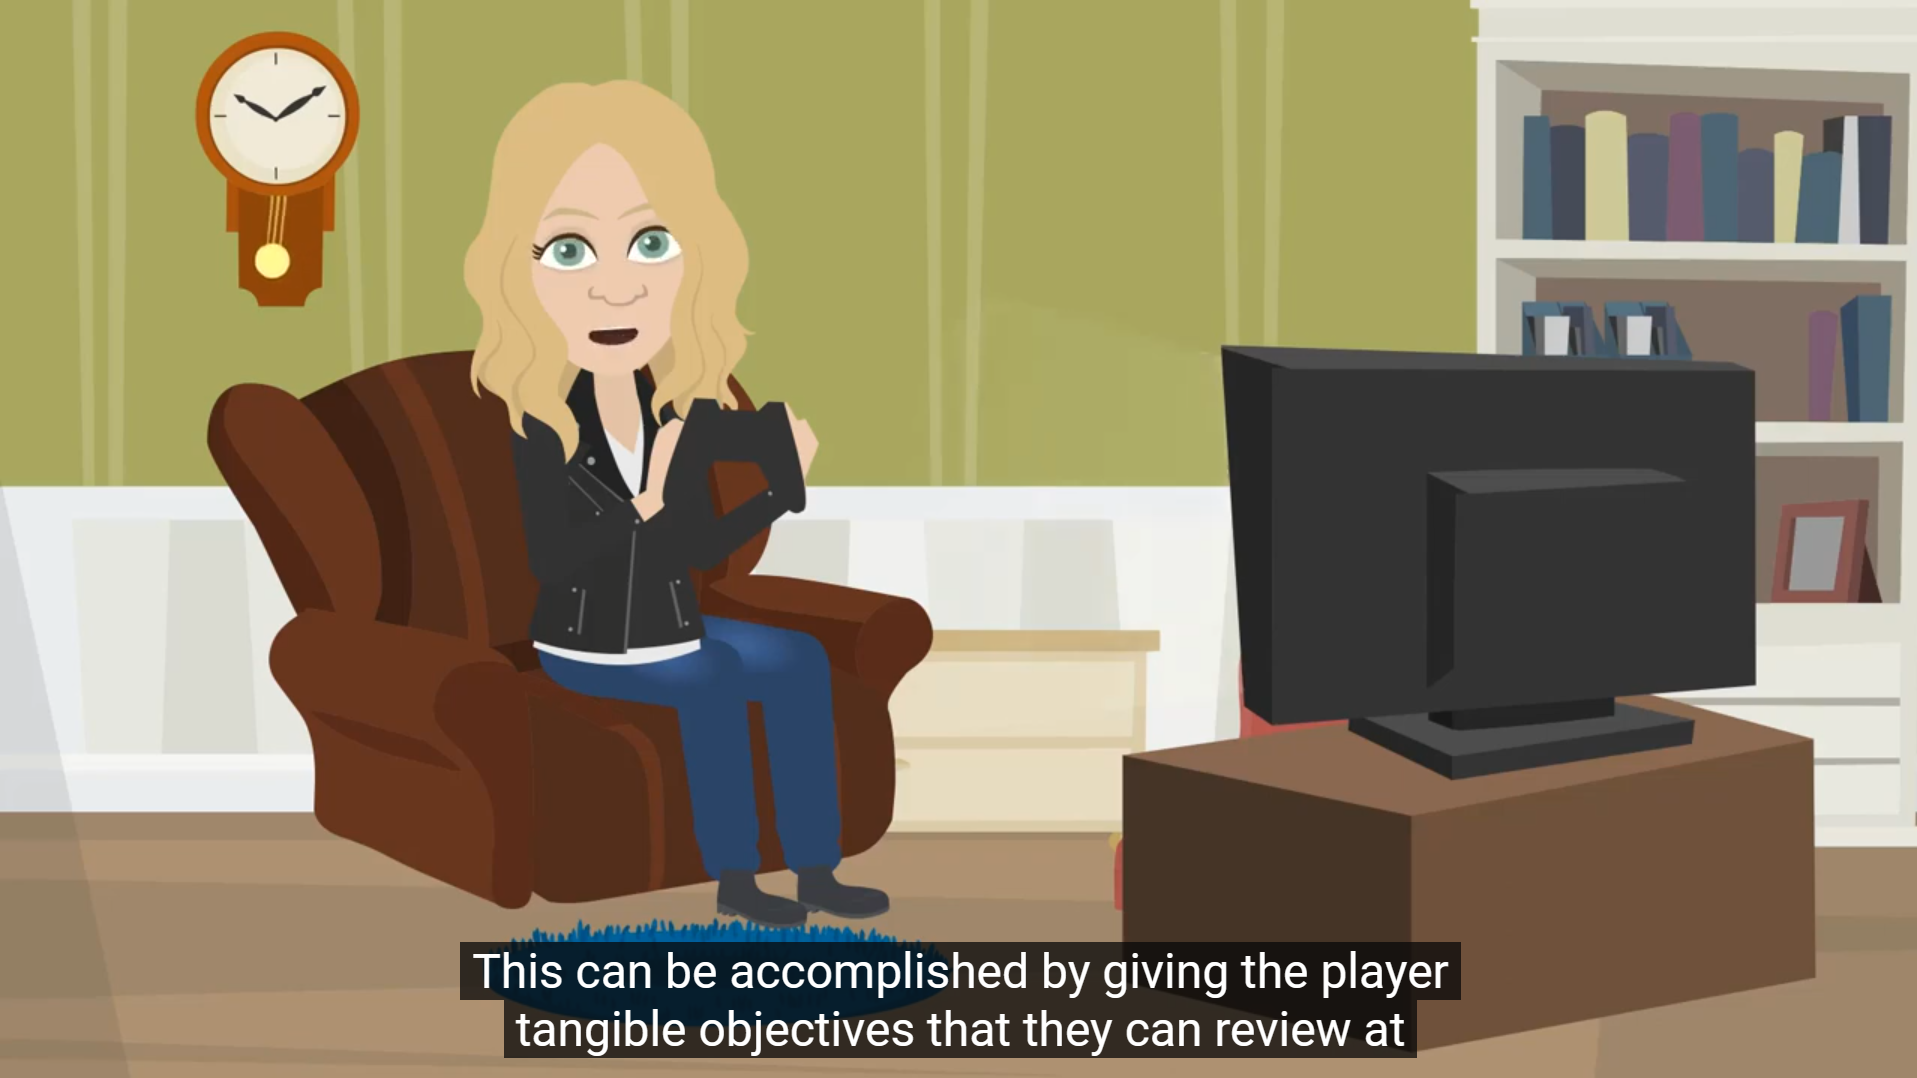 A video of a cartoon woman sitting on a couch in front of a TV screen. Closed captions read: "This can be accomplished by giving the player tangible objectives that they can review at..."